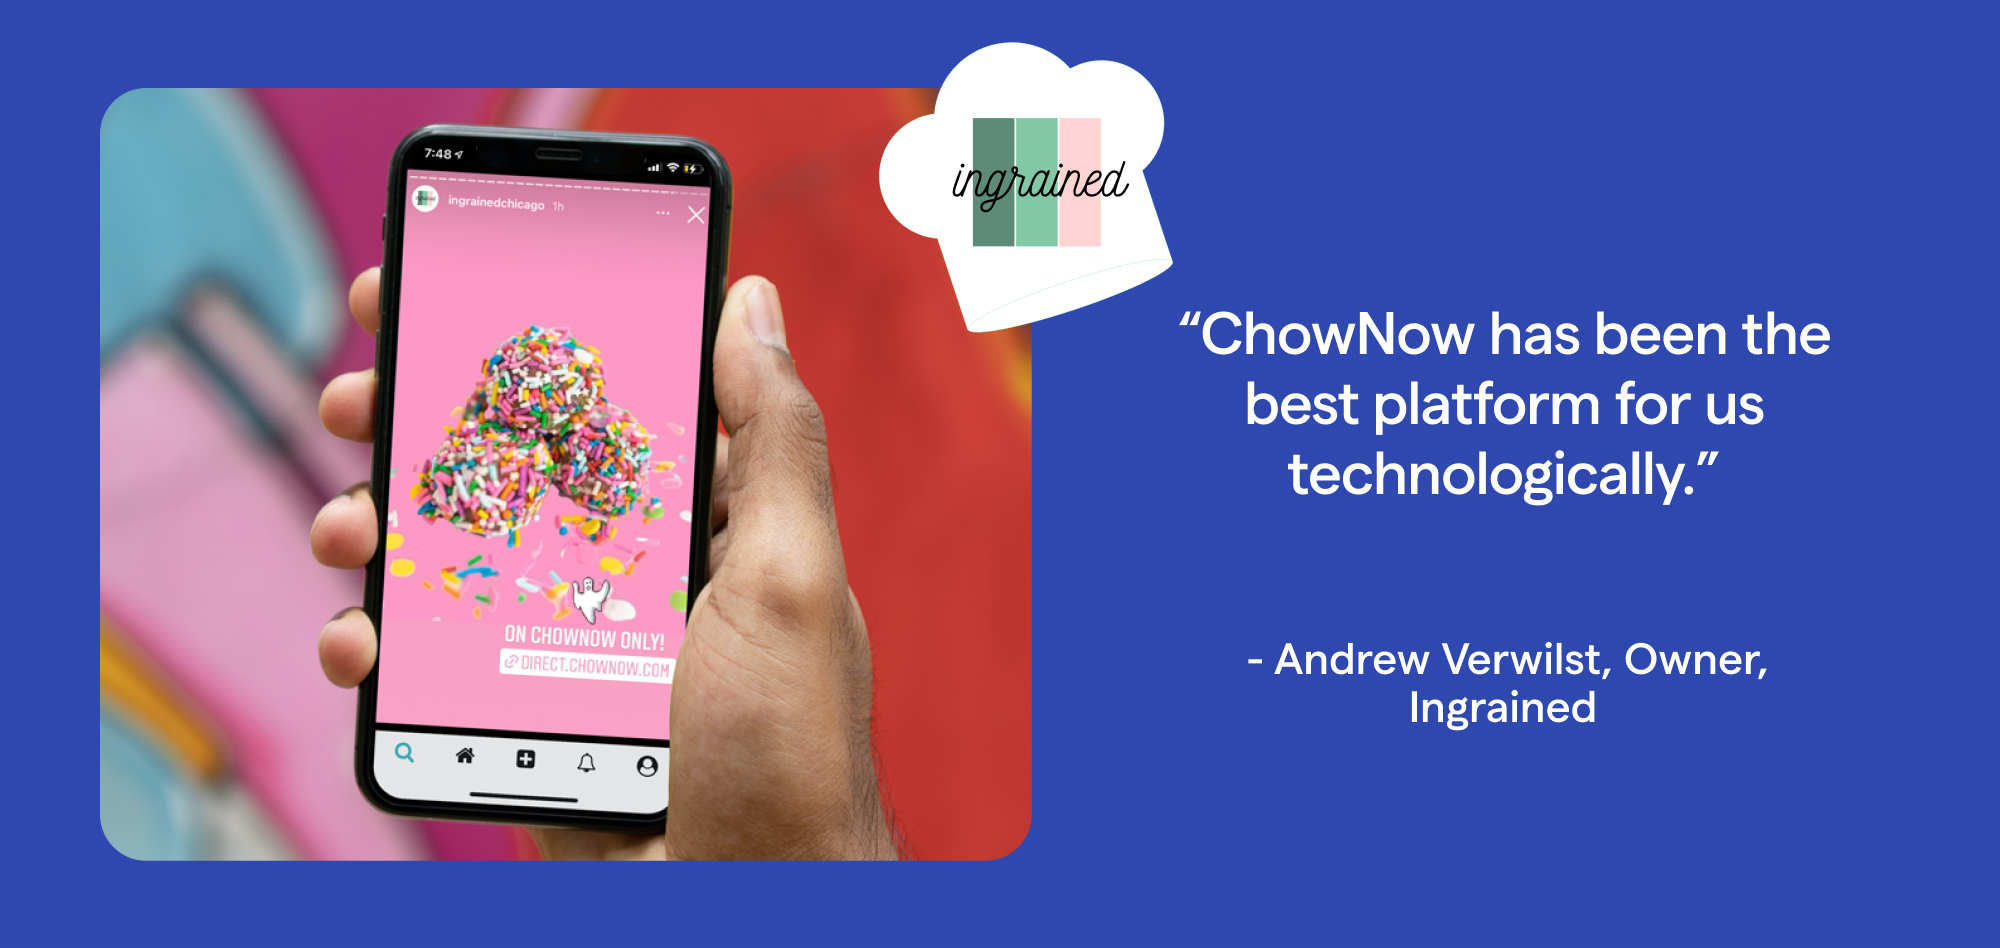 ingrained's owner says "ChowNow has been the best platform for us technologically"